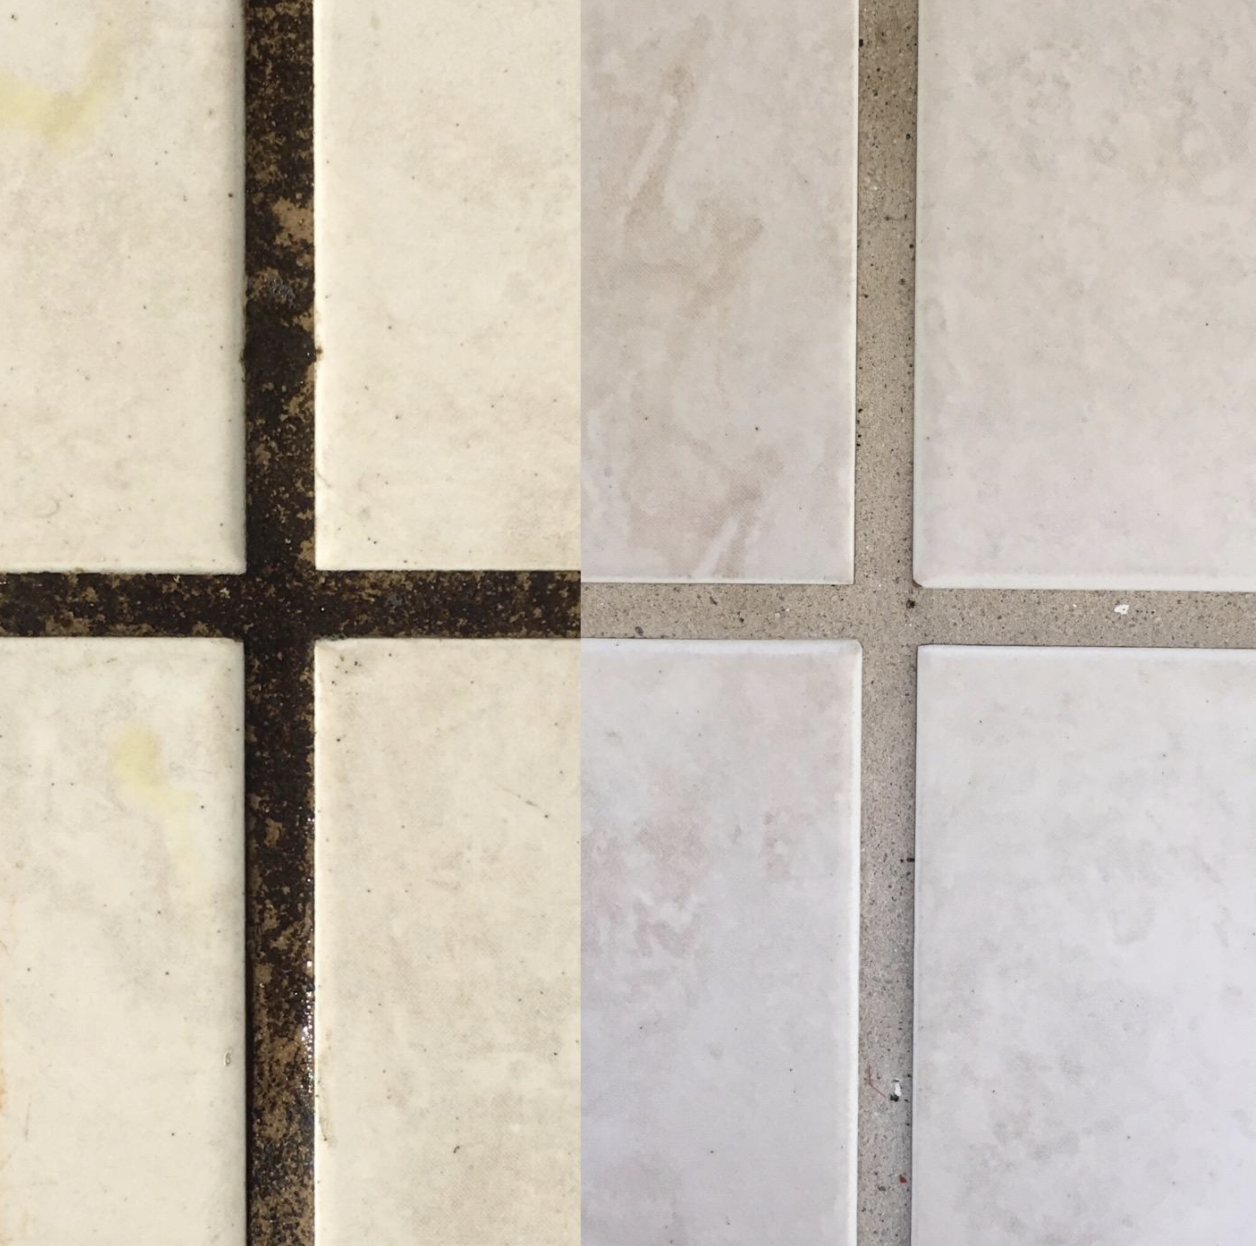 A customer review photo showing the difference in their grout before and after using the cleaner